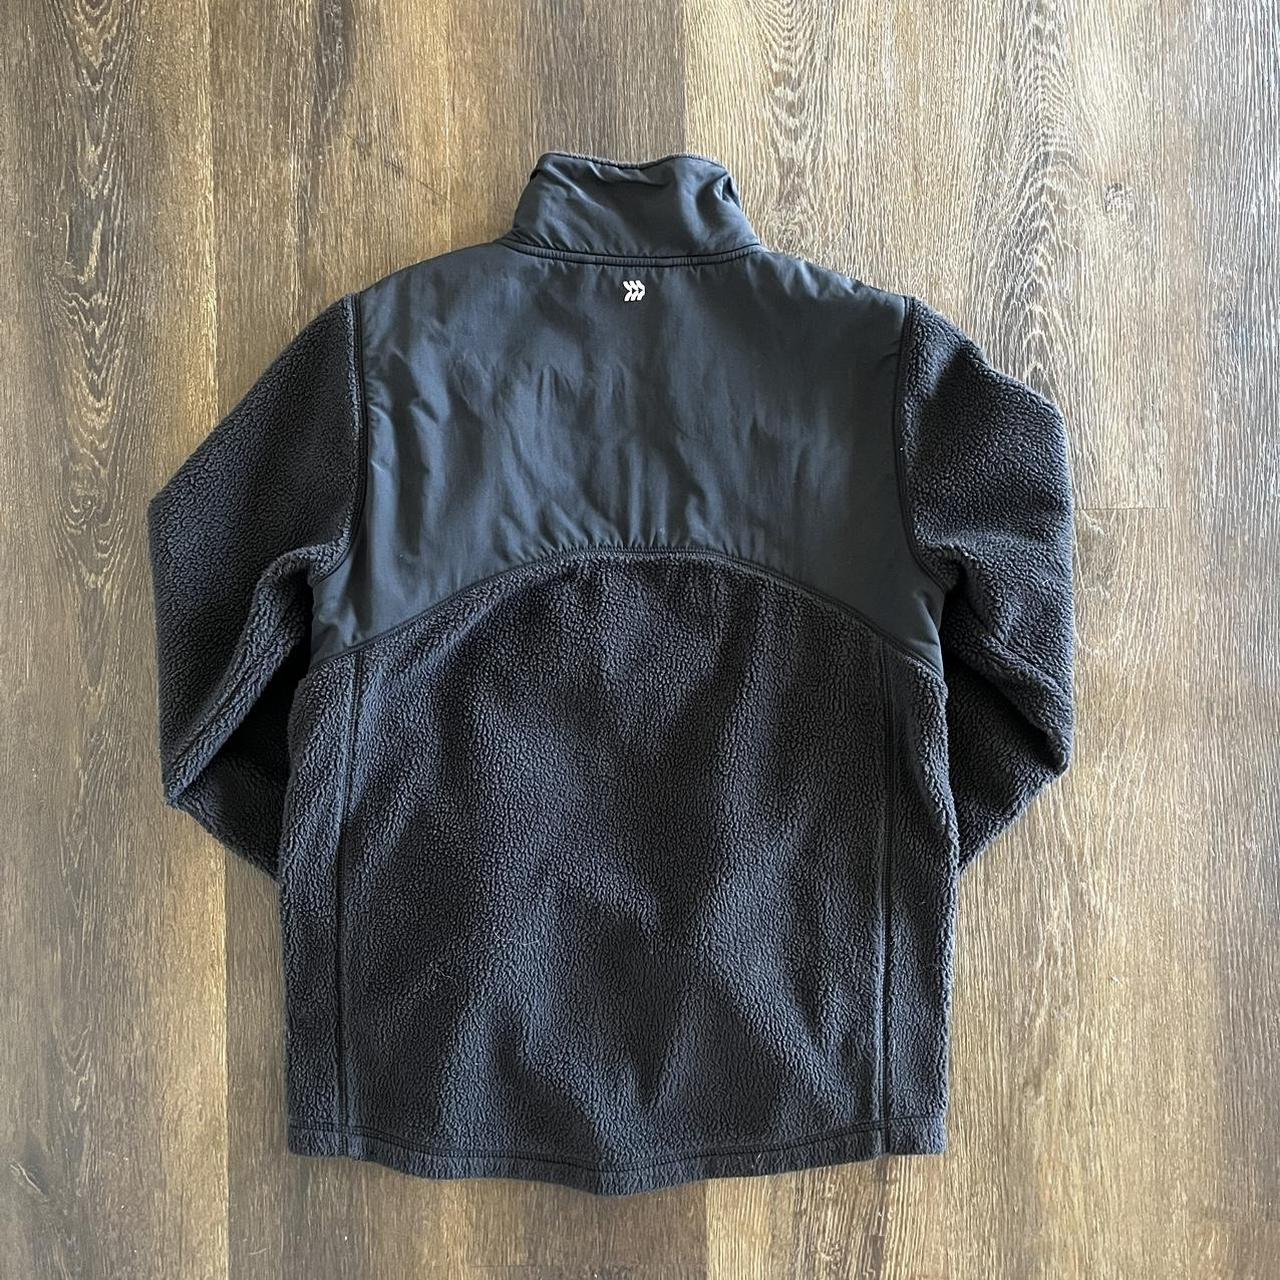 All In Motion Black Fleece tag says small - fits - Depop